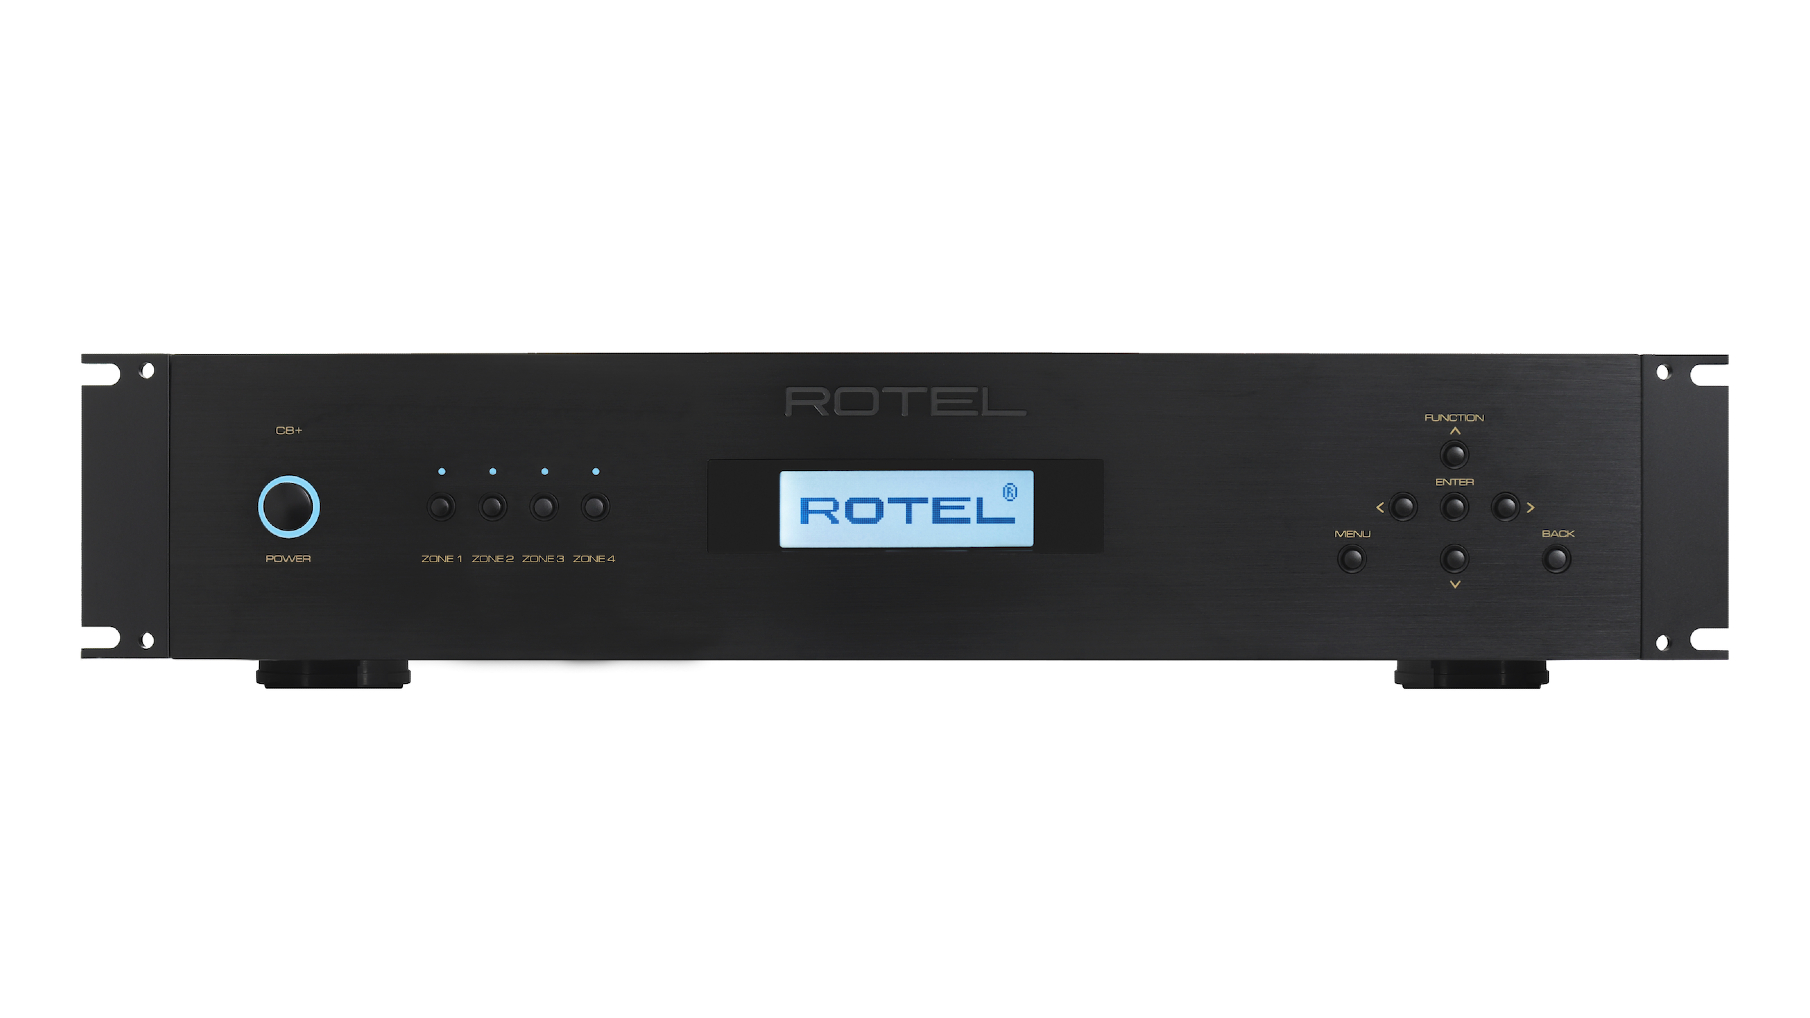 Rotel launches two new custom install amplifiers